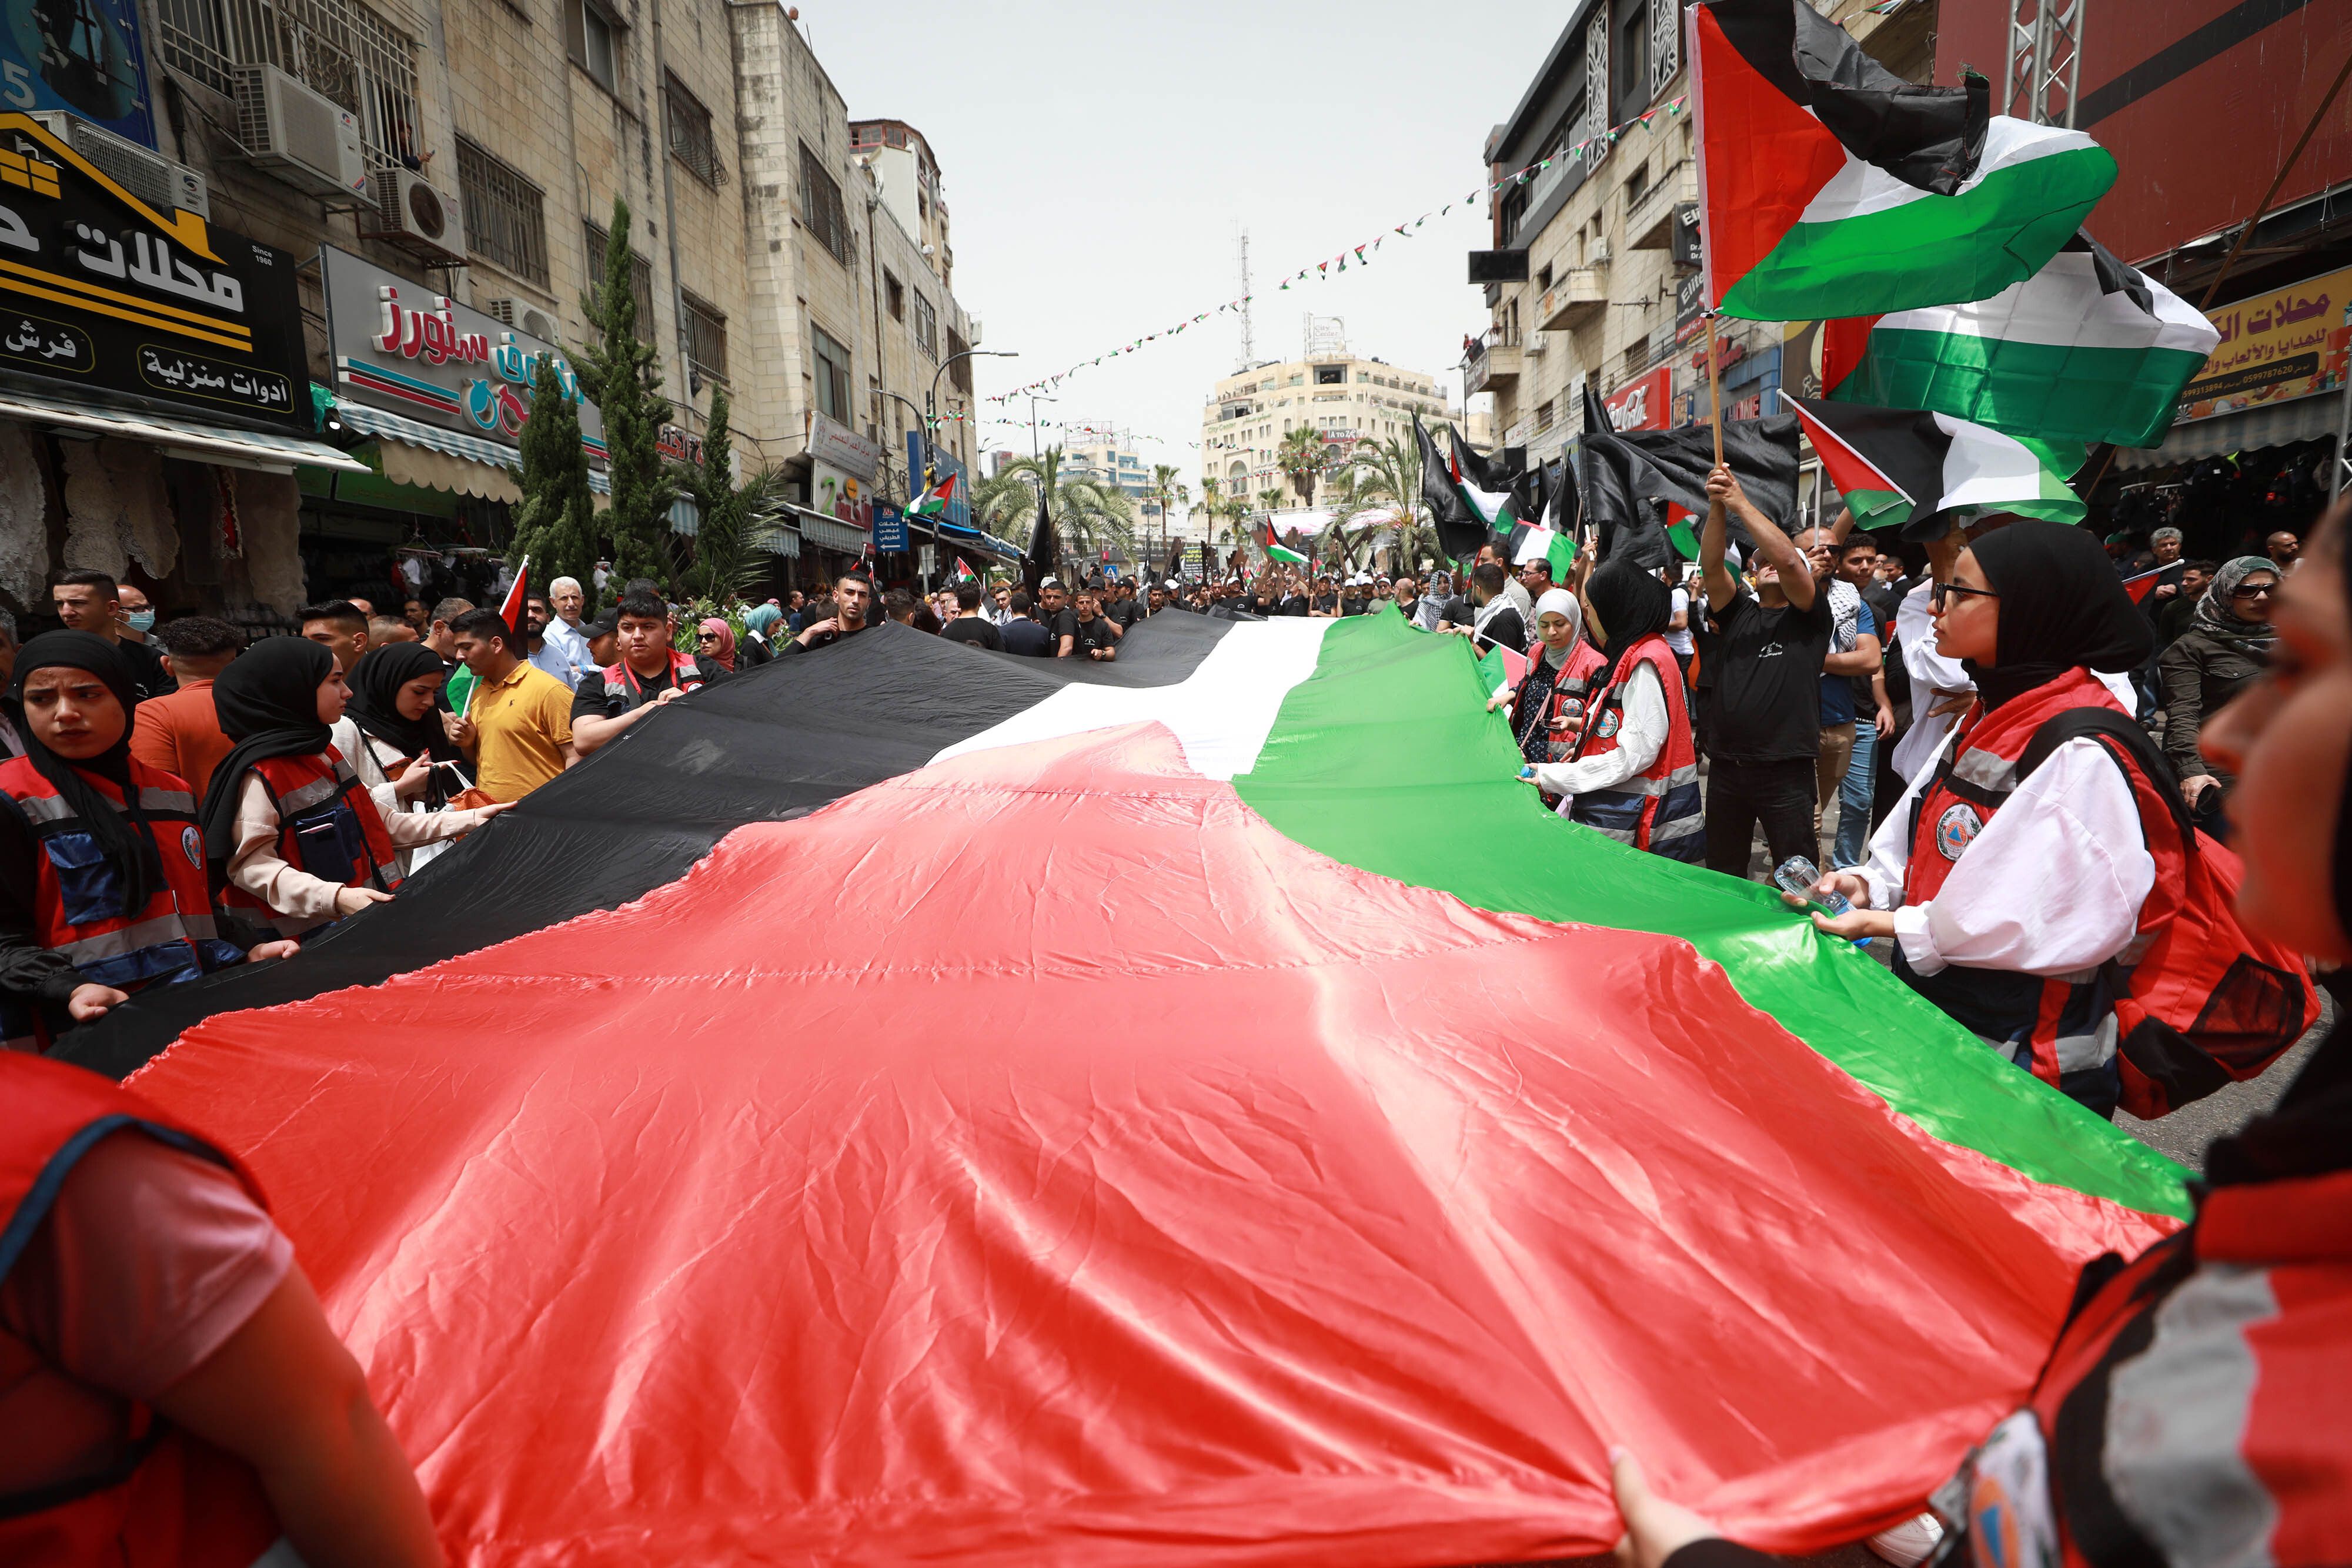 People take part in a demonstration with Palestinian flags and banners on the 74th anniversary of the Nakba, in Ramallah, West Bank on May 15, 2022. 